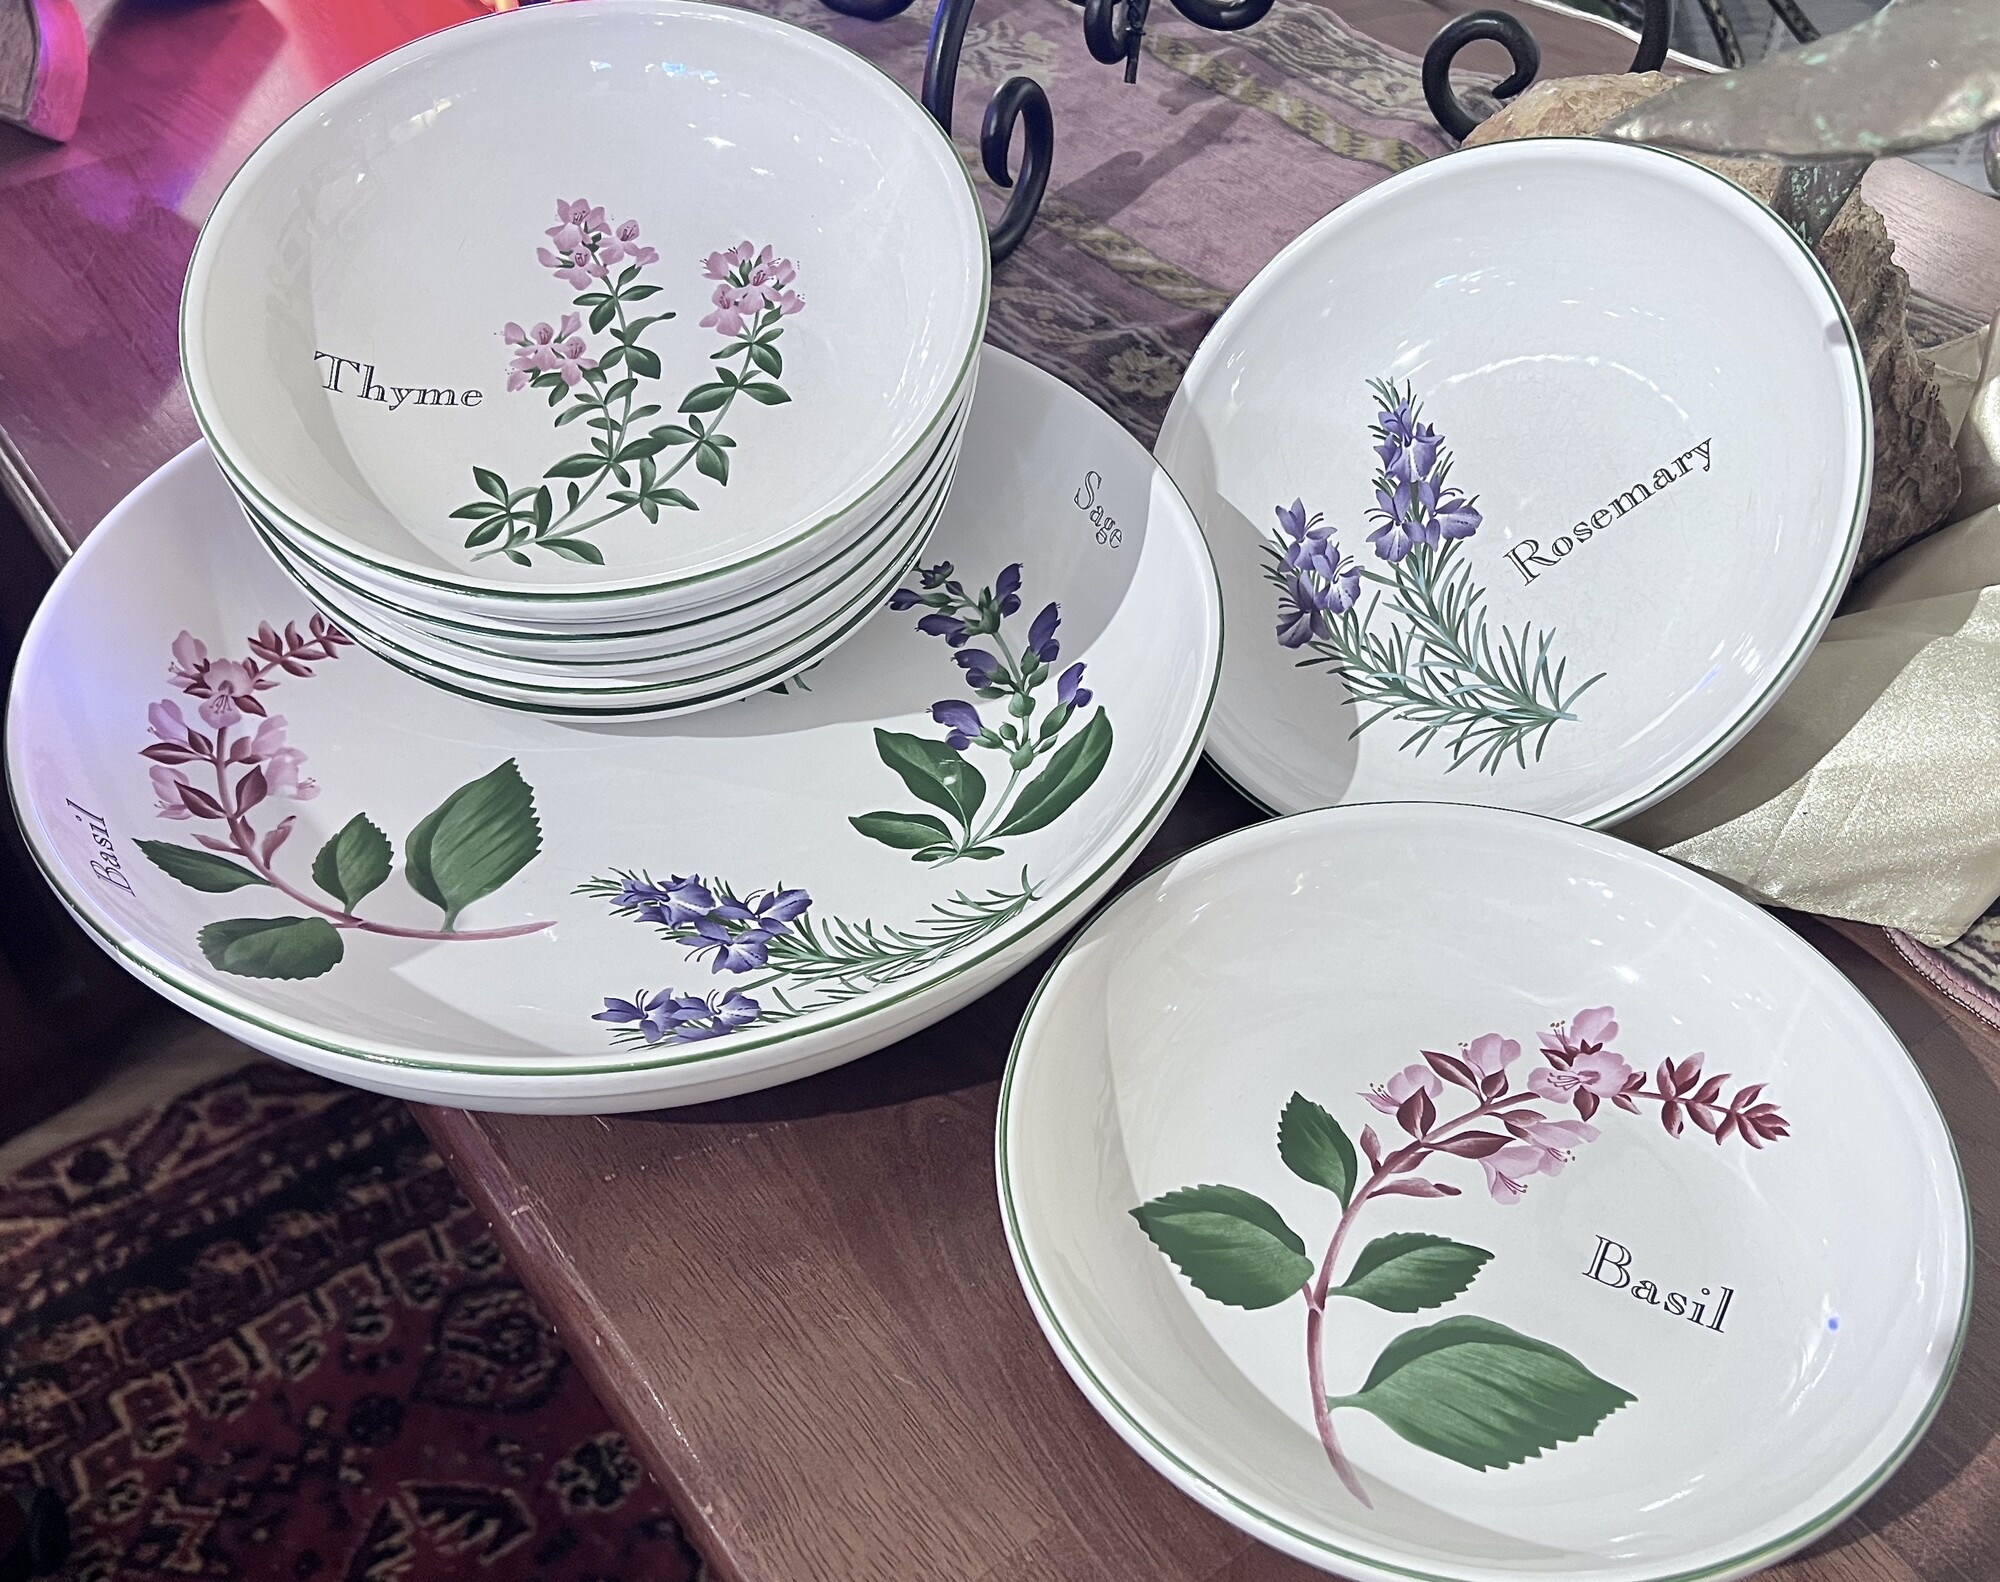 Salad Set Portugal - Herb themed
Size: 8 Pieces